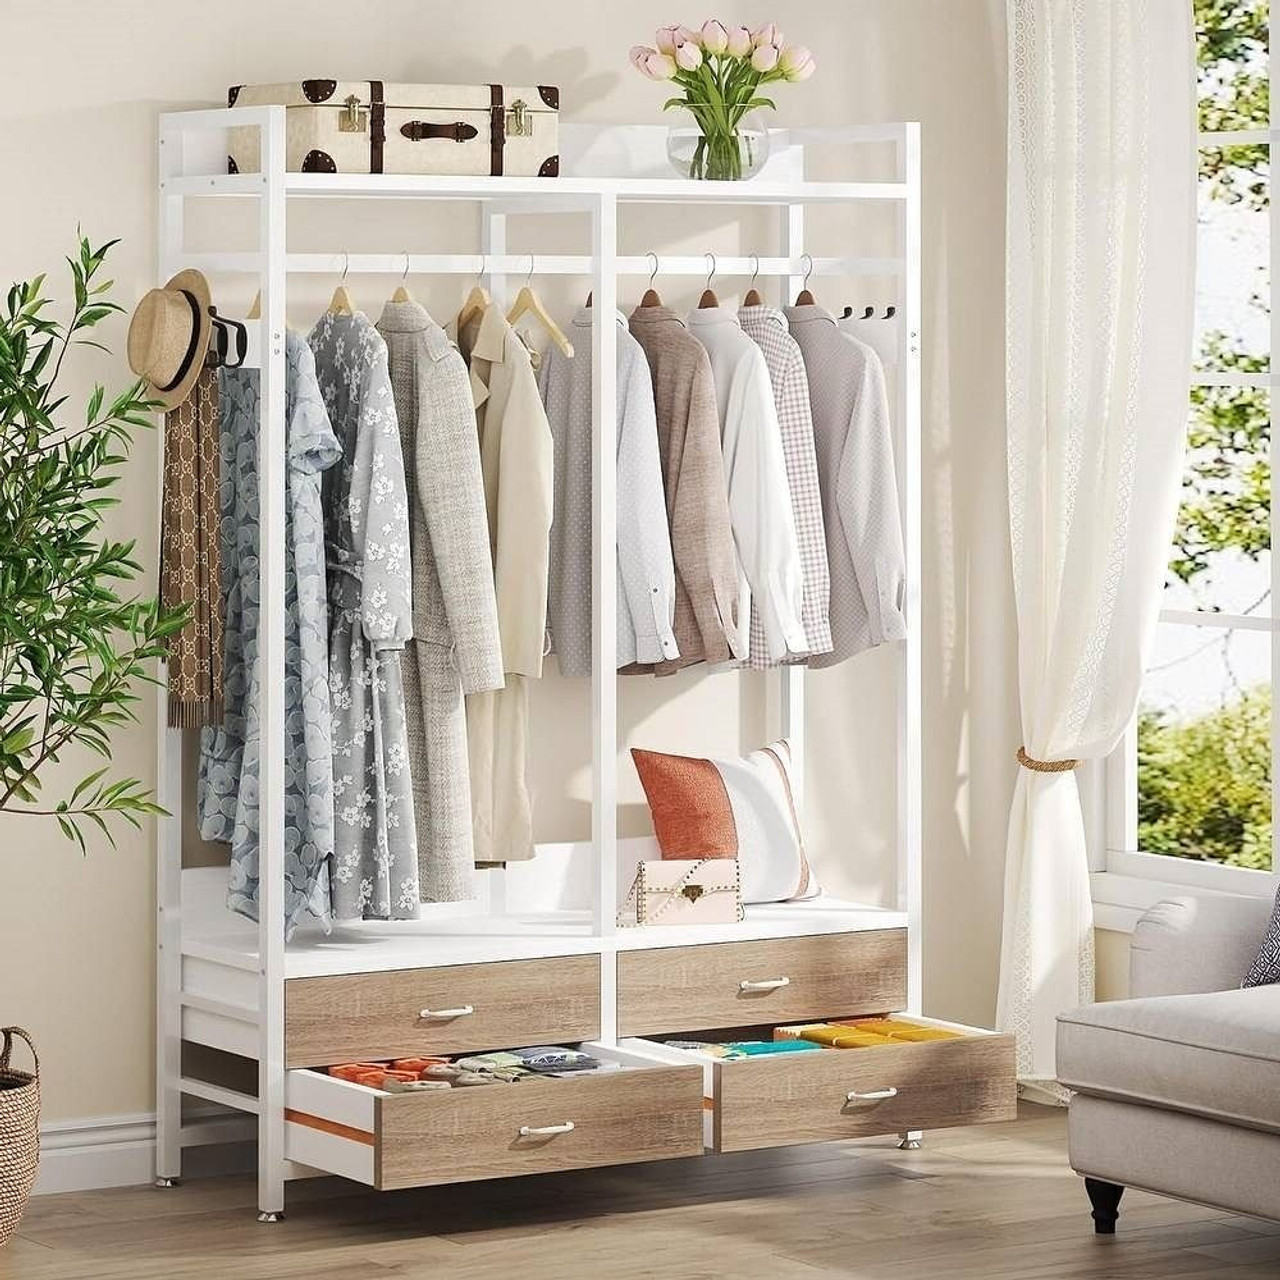 Freestanding White Oak Garment Rack Clothes Hanging Rod with 4 Storage Drawers